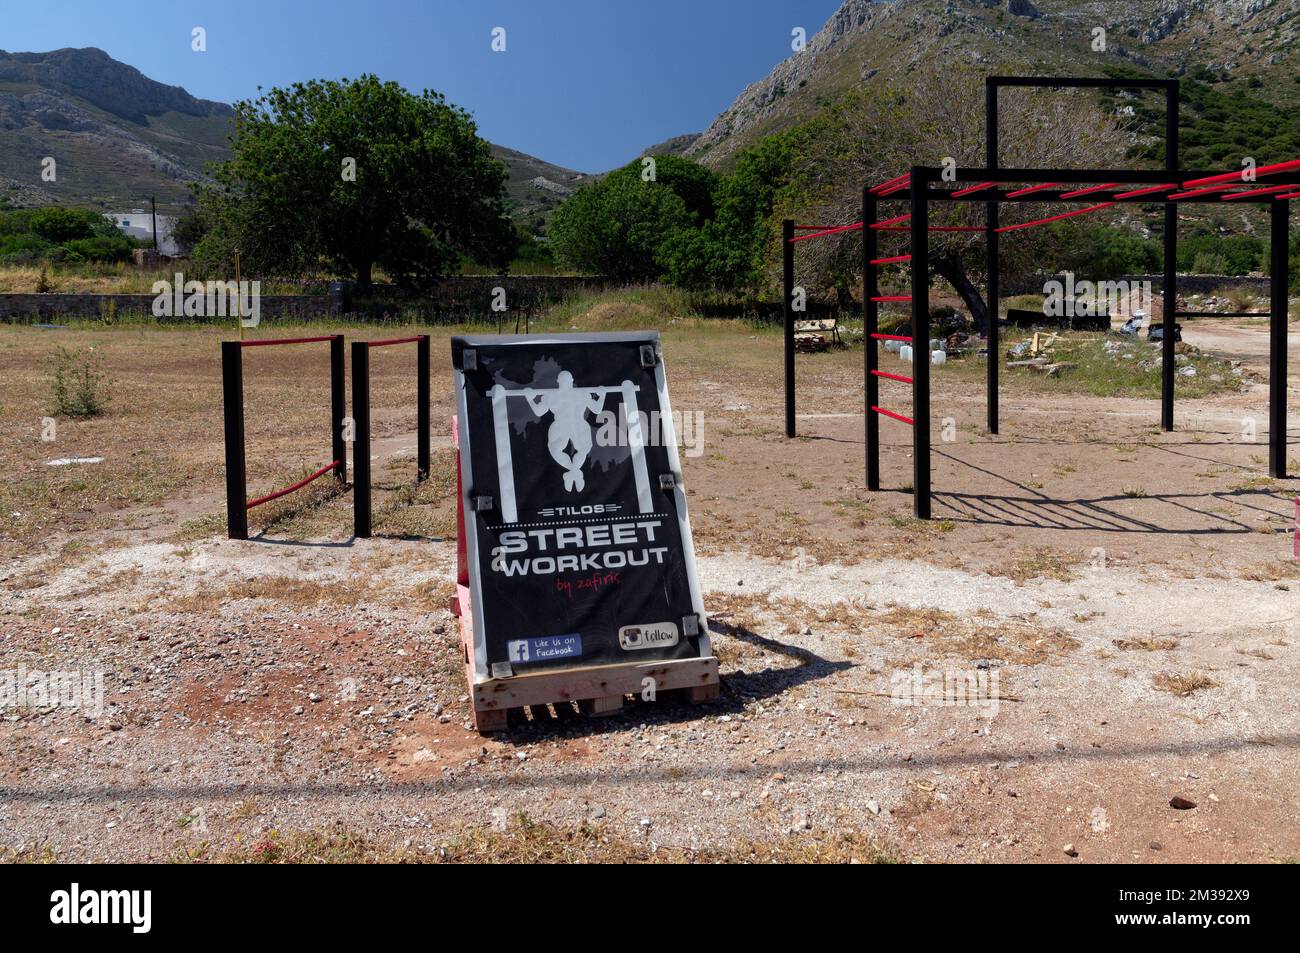 Street Workout, Outdoor fitness centre, Tilos island off Rhodes. Views 2022. May. cym Stock Photo